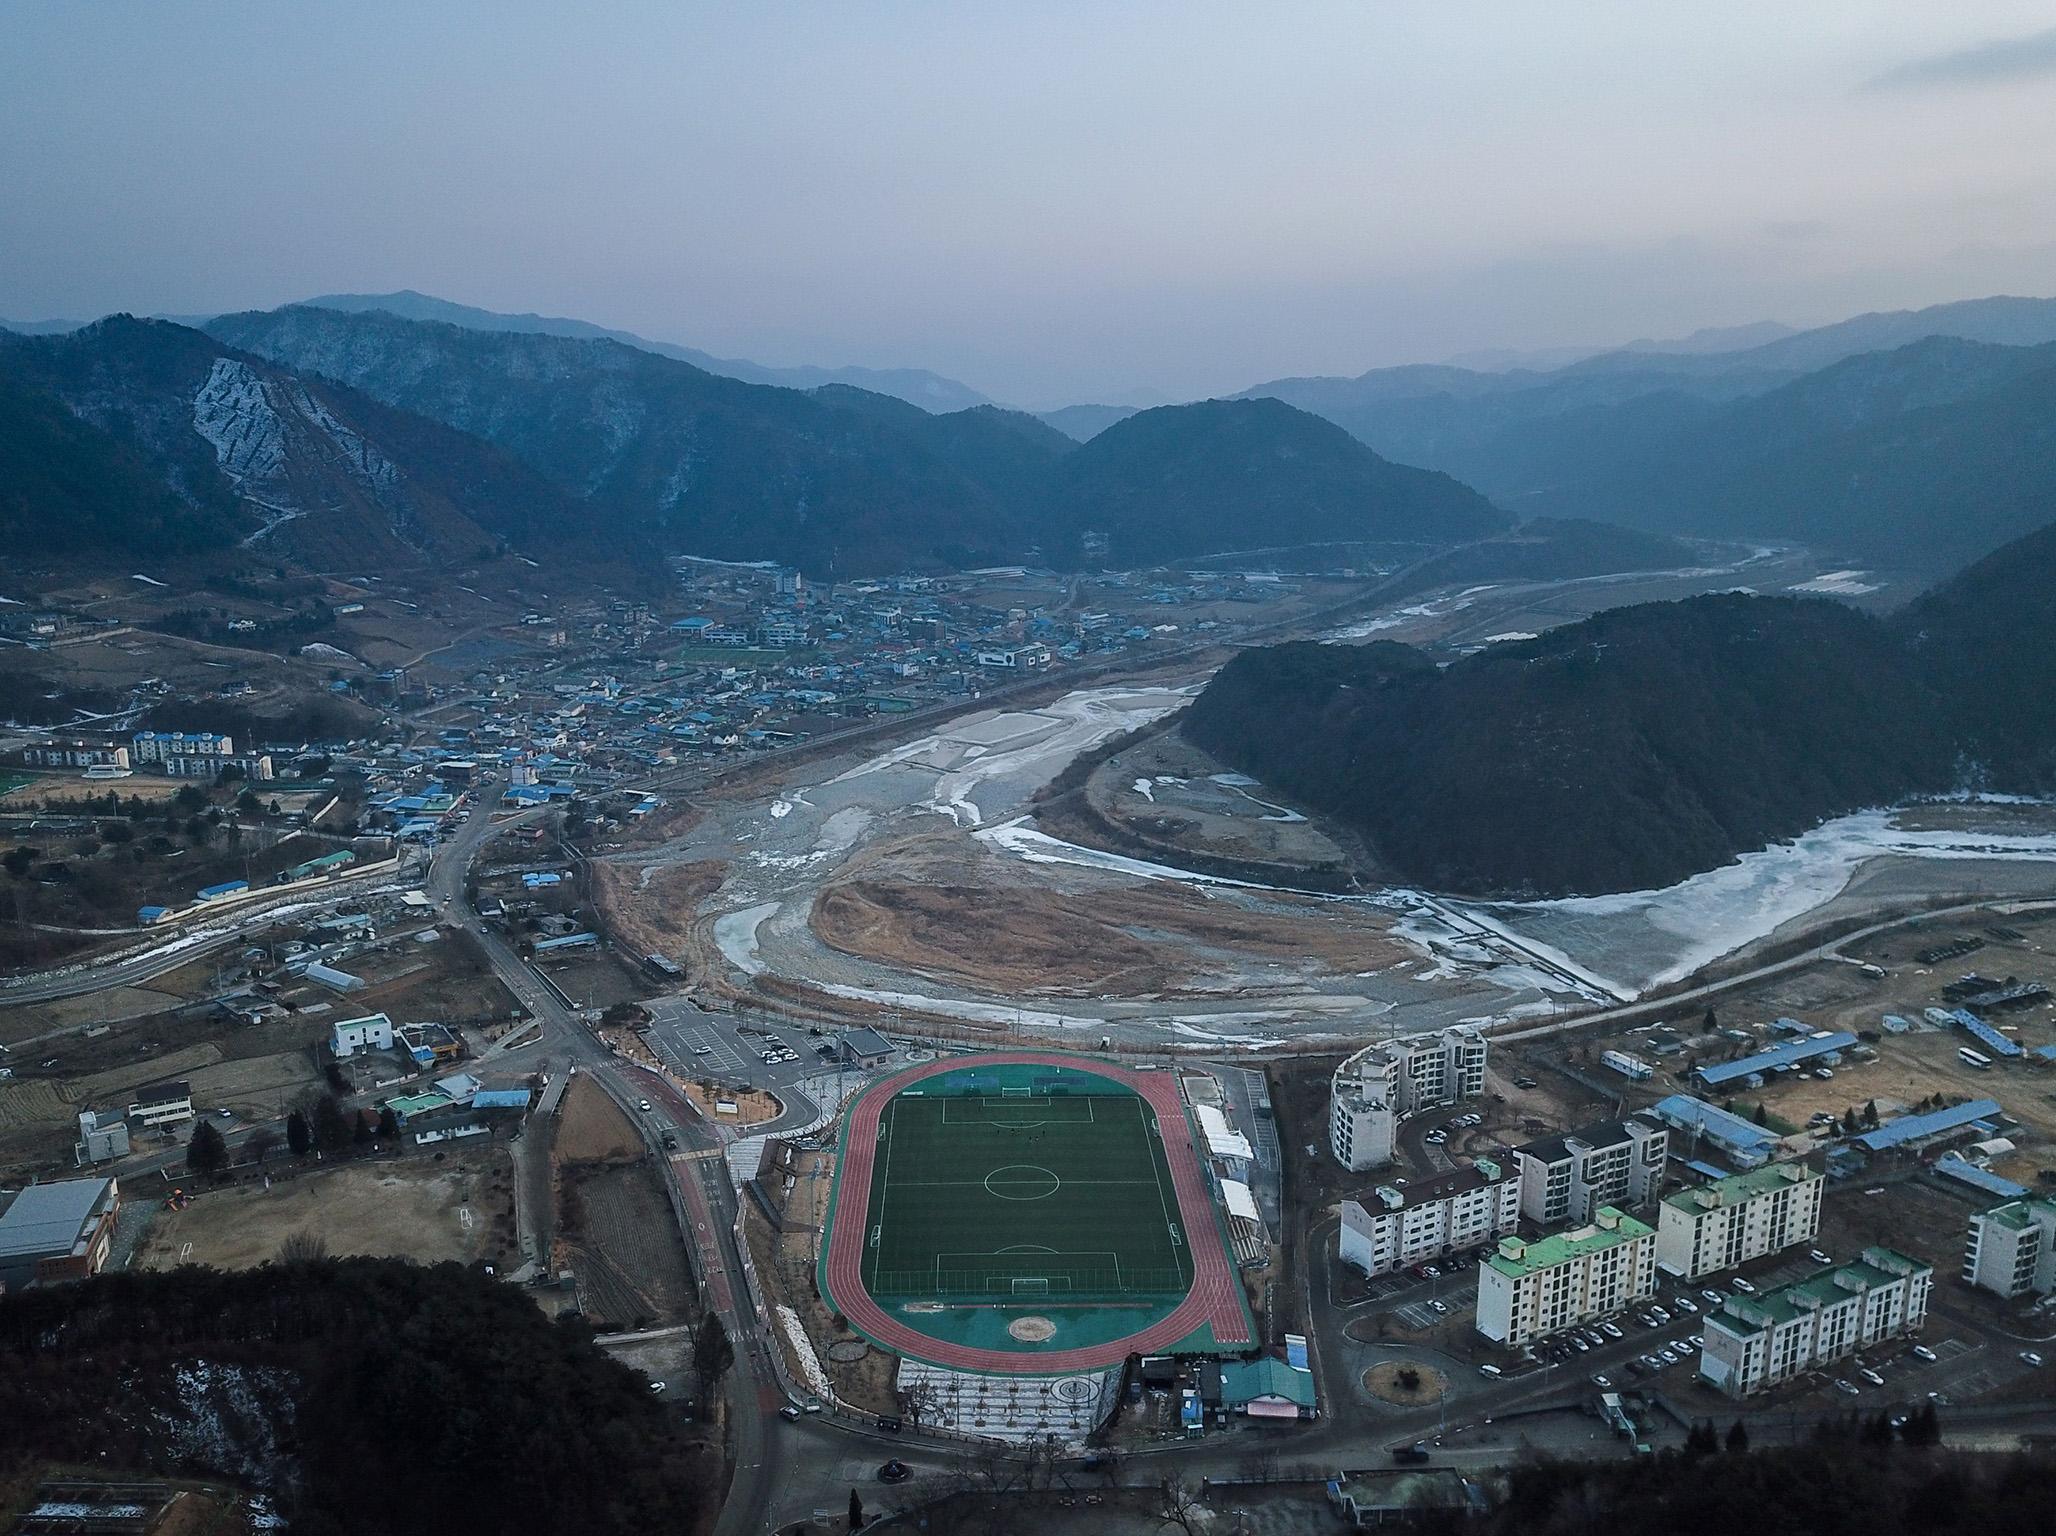 Haean-Myeon, a small military town on the edge of the demilitarised zone